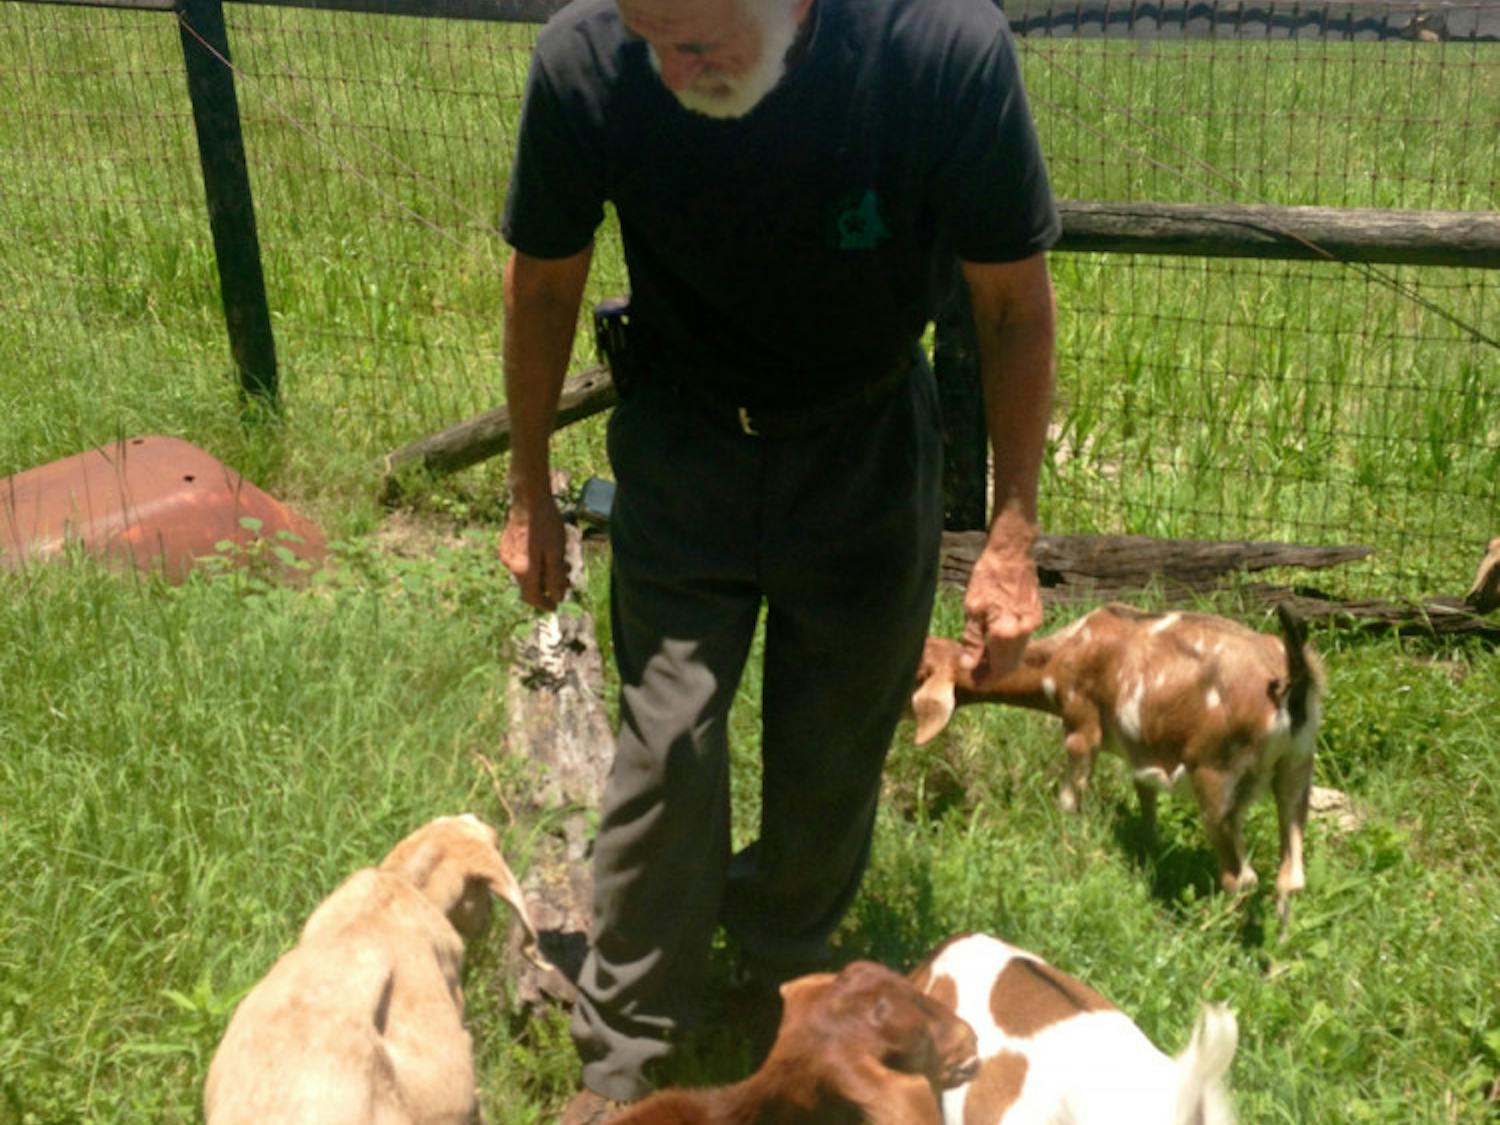 Charlie Meister tends to goats on his farm in Gainesville. Meister owns about 100 goats, 10 cows, 11 horses, 25 chickens, two roosters, five dogs and three donkeys.